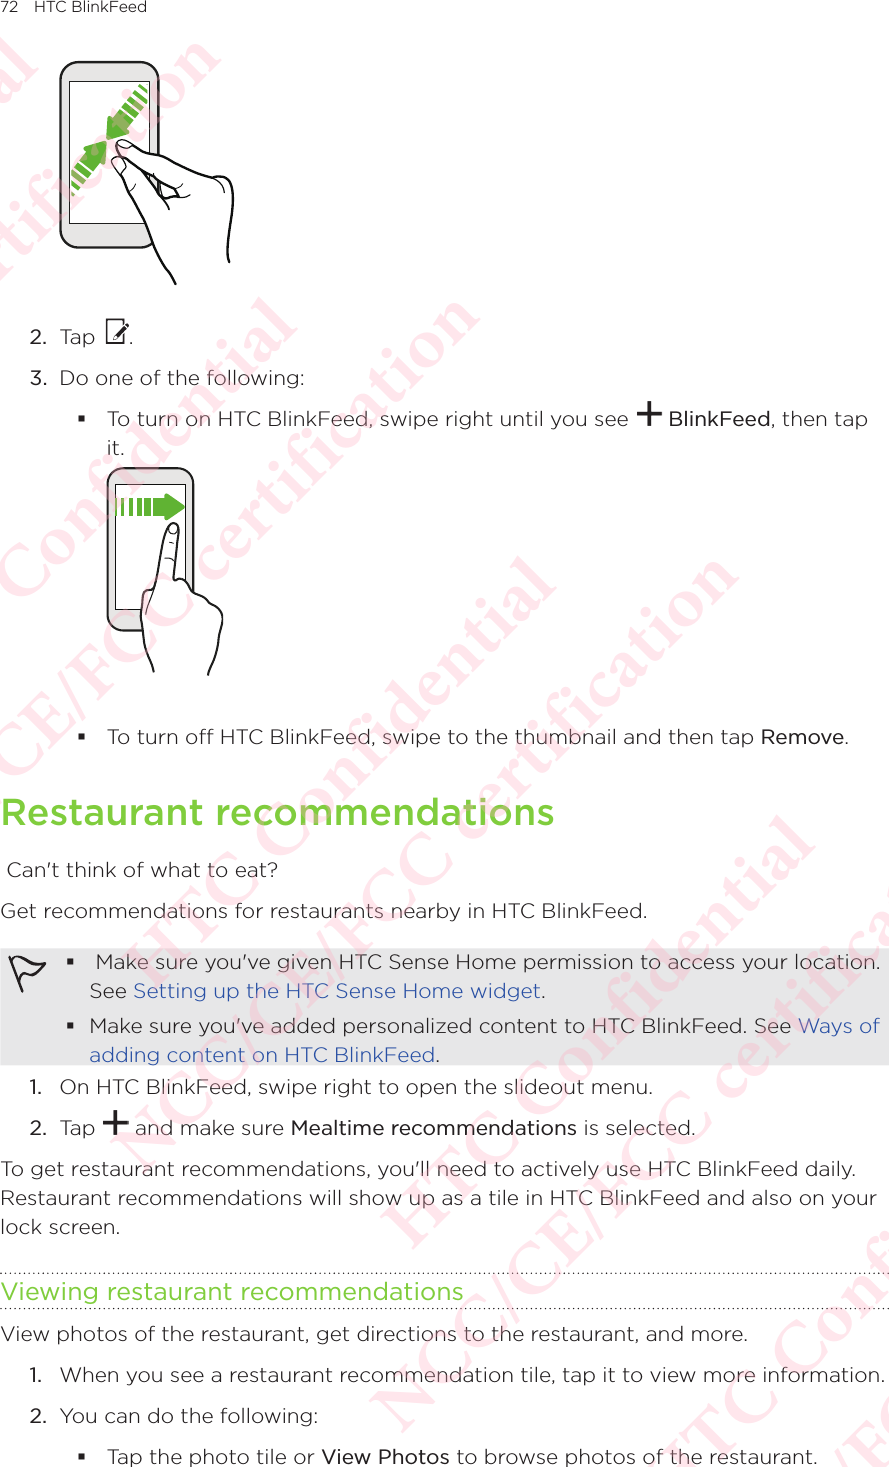 72 HTC BlinkFeed2.  Tap  . 3.  Do one of the following:  To turn on HTC BlinkFeed, swipe right until you see   BlinkFeed, then tap it.   To turn off HTC BlinkFeed, swipe to the thumbnail and then tap Remove. Restaurant recommendations Can&apos;t think of what to eat? Get recommendations for restaurants nearby in HTC BlinkFeed.   Make sure you&apos;ve given HTC Sense Home permission to access your location. See Setting up the HTC Sense Home widget.  Make sure you&apos;ve added personalized content to HTC BlinkFeed. See Ways of adding content on HTC BlinkFeed.1.  On HTC BlinkFeed, swipe right to open the slideout menu. 2.  Tap   and make sure Mealtime recommendations is selected. To get restaurant recommendations, you&apos;ll need to actively use HTC BlinkFeed daily. Restaurant recommendations will show up as a tile in HTC BlinkFeed and also on your lock screen. Viewing restaurant recommendationsView photos of the restaurant, get directions to the restaurant, and more. 1.  When you see a restaurant recommendation tile, tap it to view more information. 2.  You can do the following:  Tap the photo tile or View Photos to browse photos of the restaurant. HTC Confidential NCC/CE/FCC certification  HTC Confidential NCC/CE/FCC certification  HTC Confidential NCC/CE/FCC certification  HTC Confidential NCC/CE/FCC certification  HTC Confidential NCC/CE/FCC certification